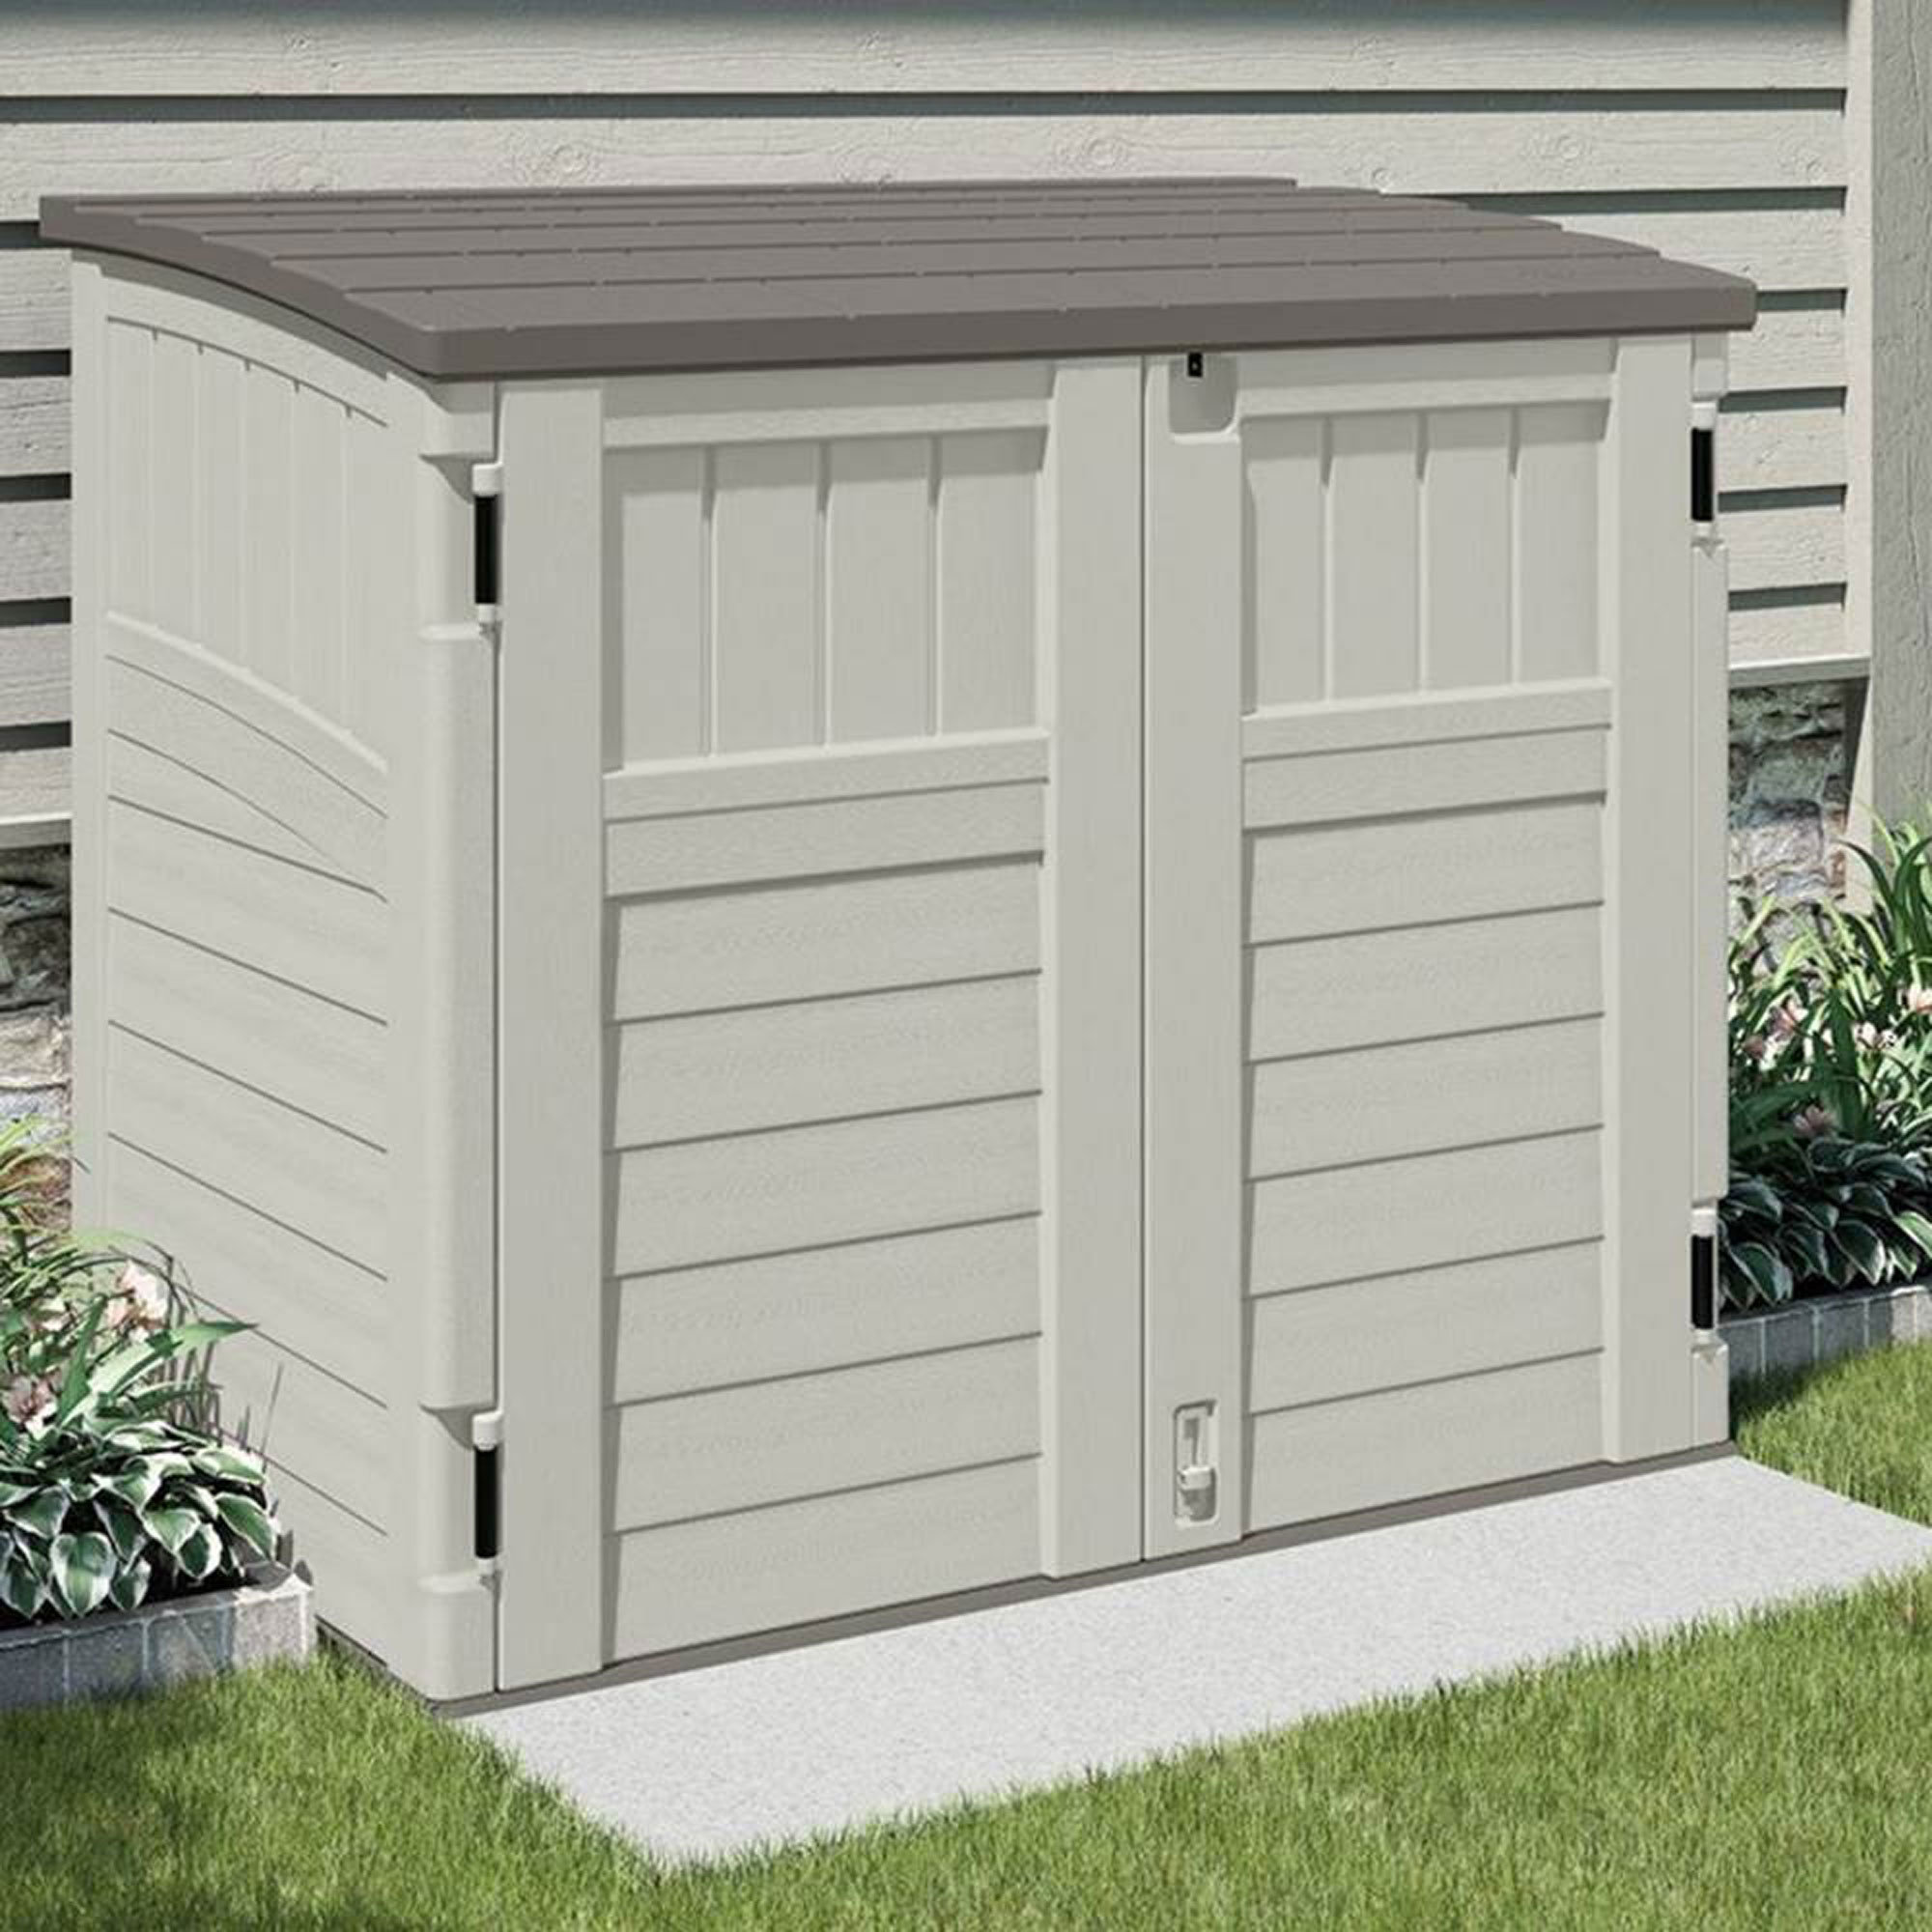 Rubbermaid® Horizontal Outdoor Storage Shed